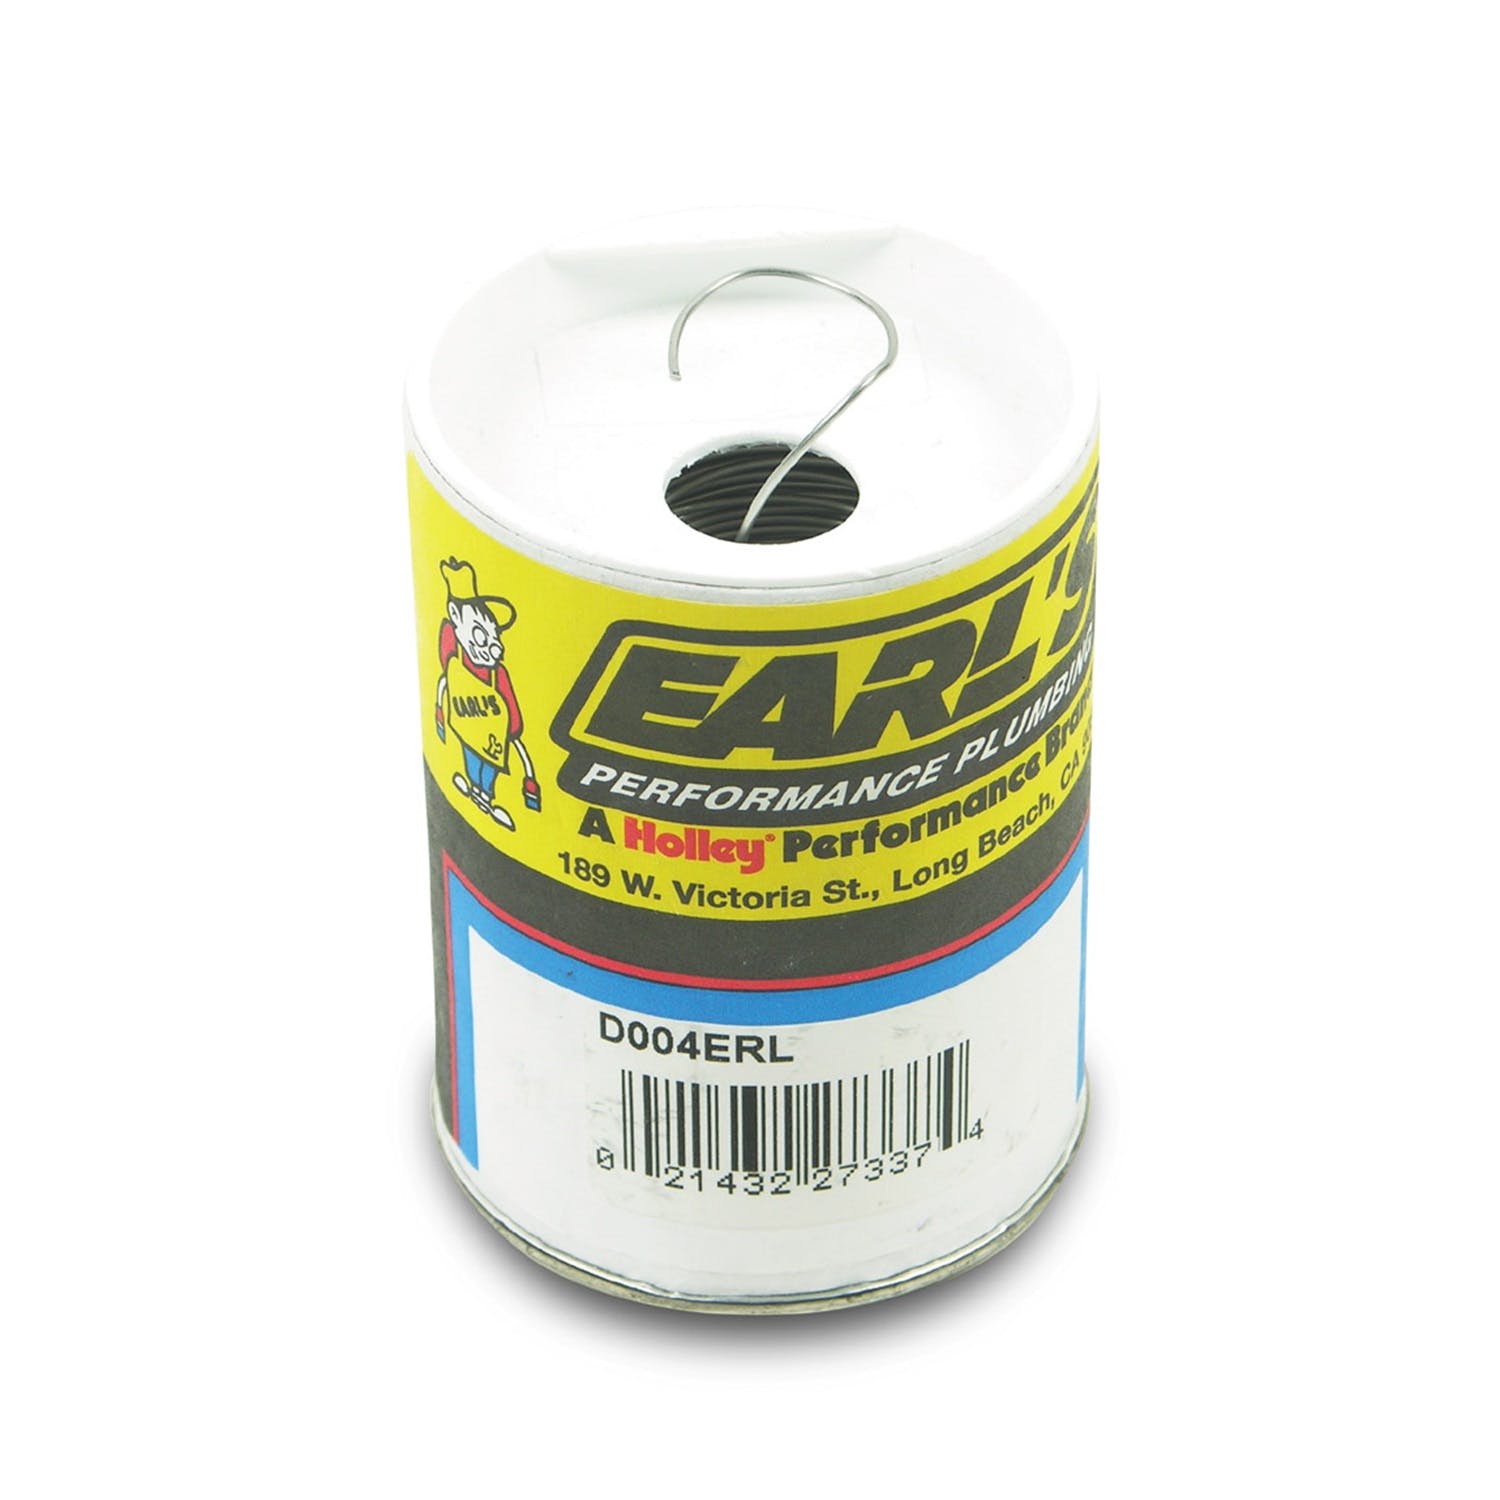 Earl's Performance Plumbing D003ERL .032 Type 302 S.S. Safety Wire